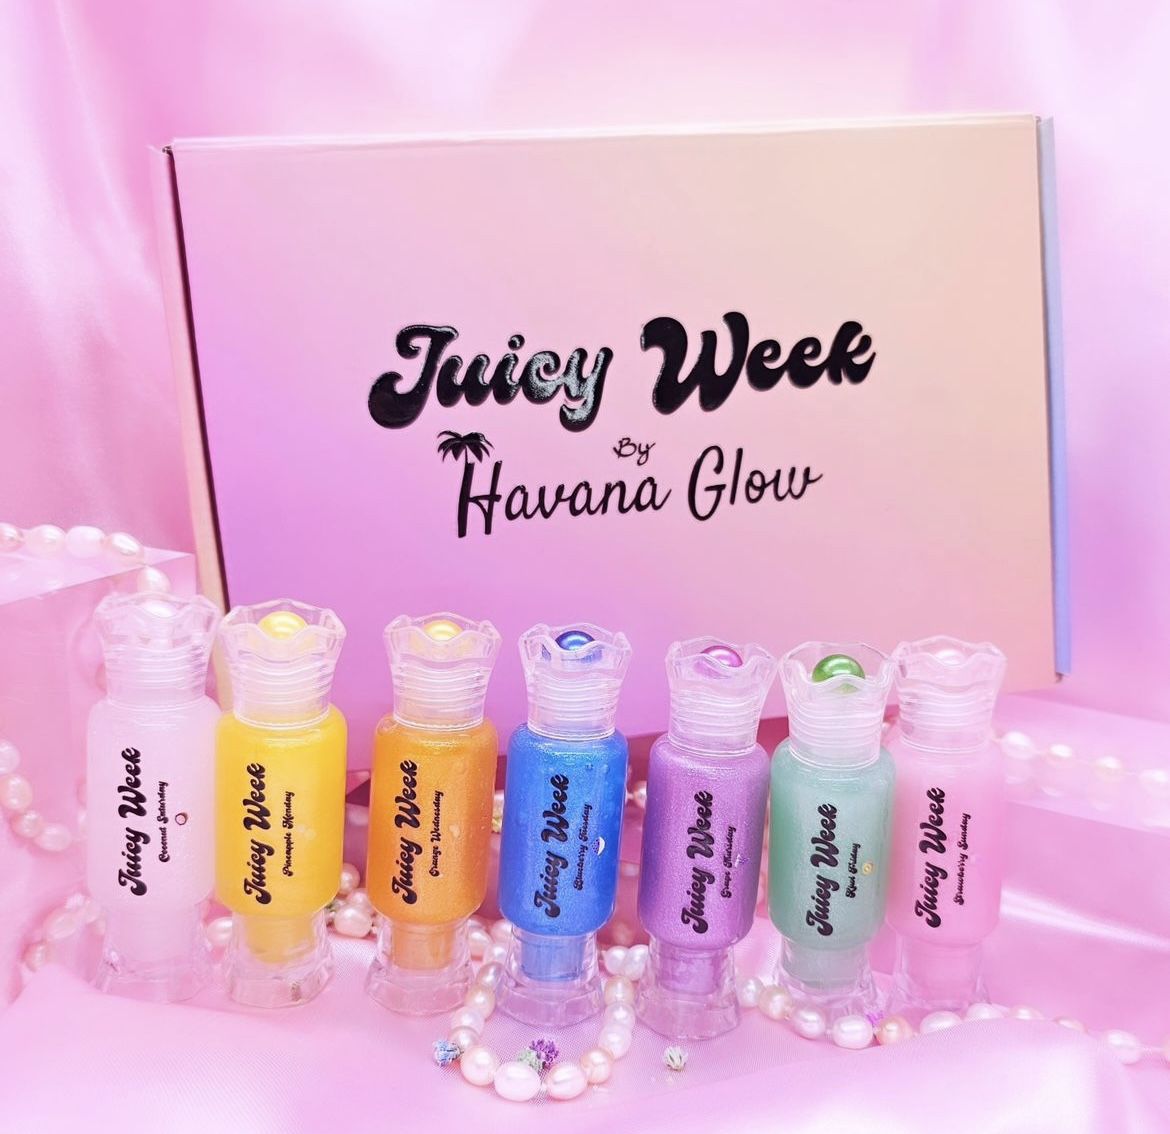 Juicy Week By Havana Glow SPECIAL EDITION 7 Different Colors Of Lip Gloss  7 Different Delicious Flavors 